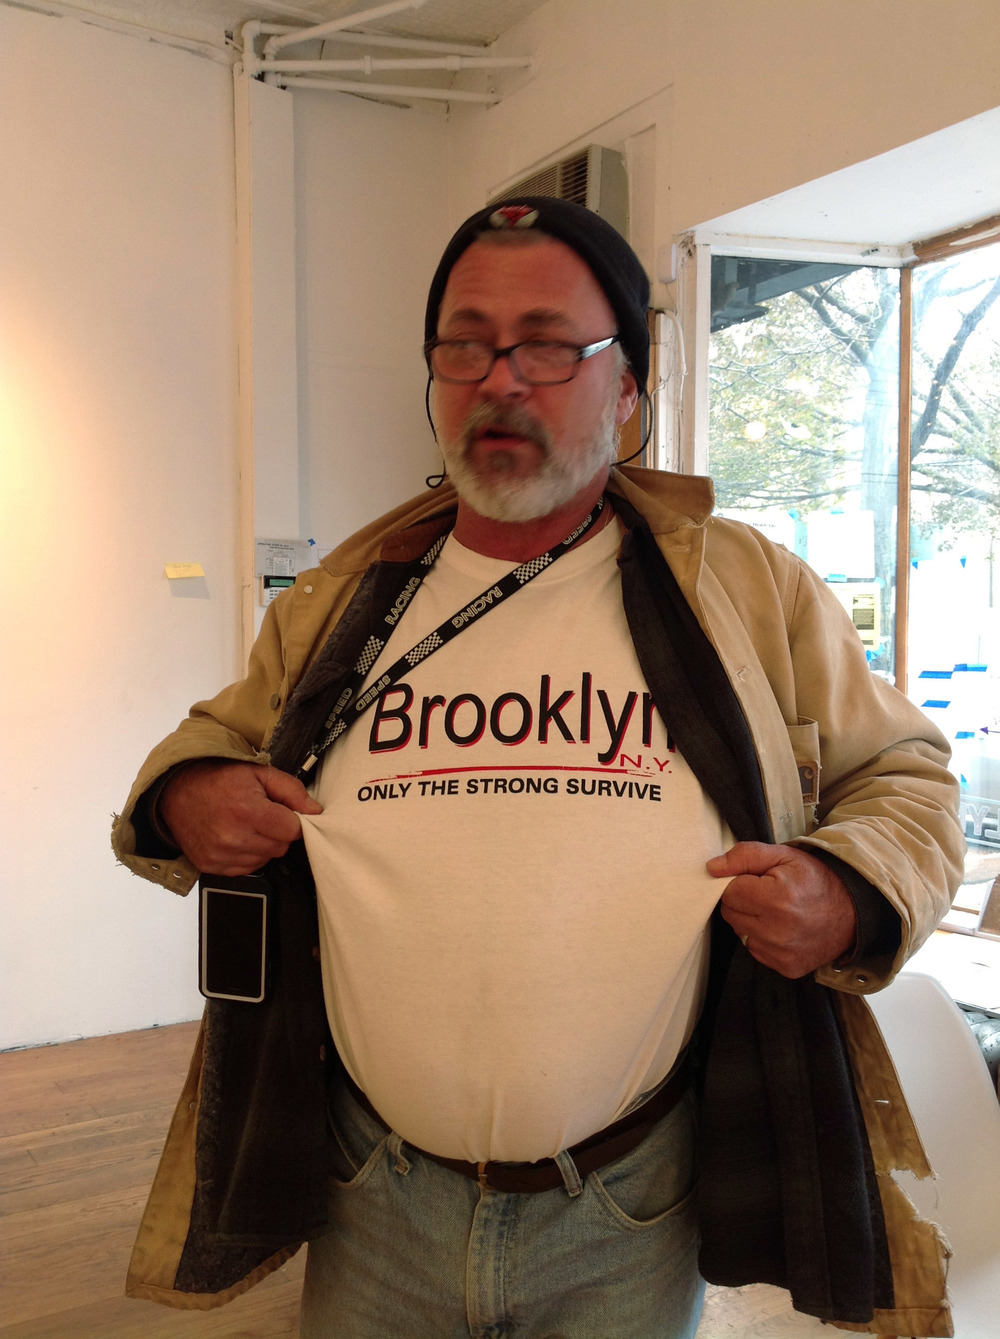 "Brooklyn, only the strrong survive" on t-shir of Steve Tarpin of Steve's Key Lime Pie (Copy)